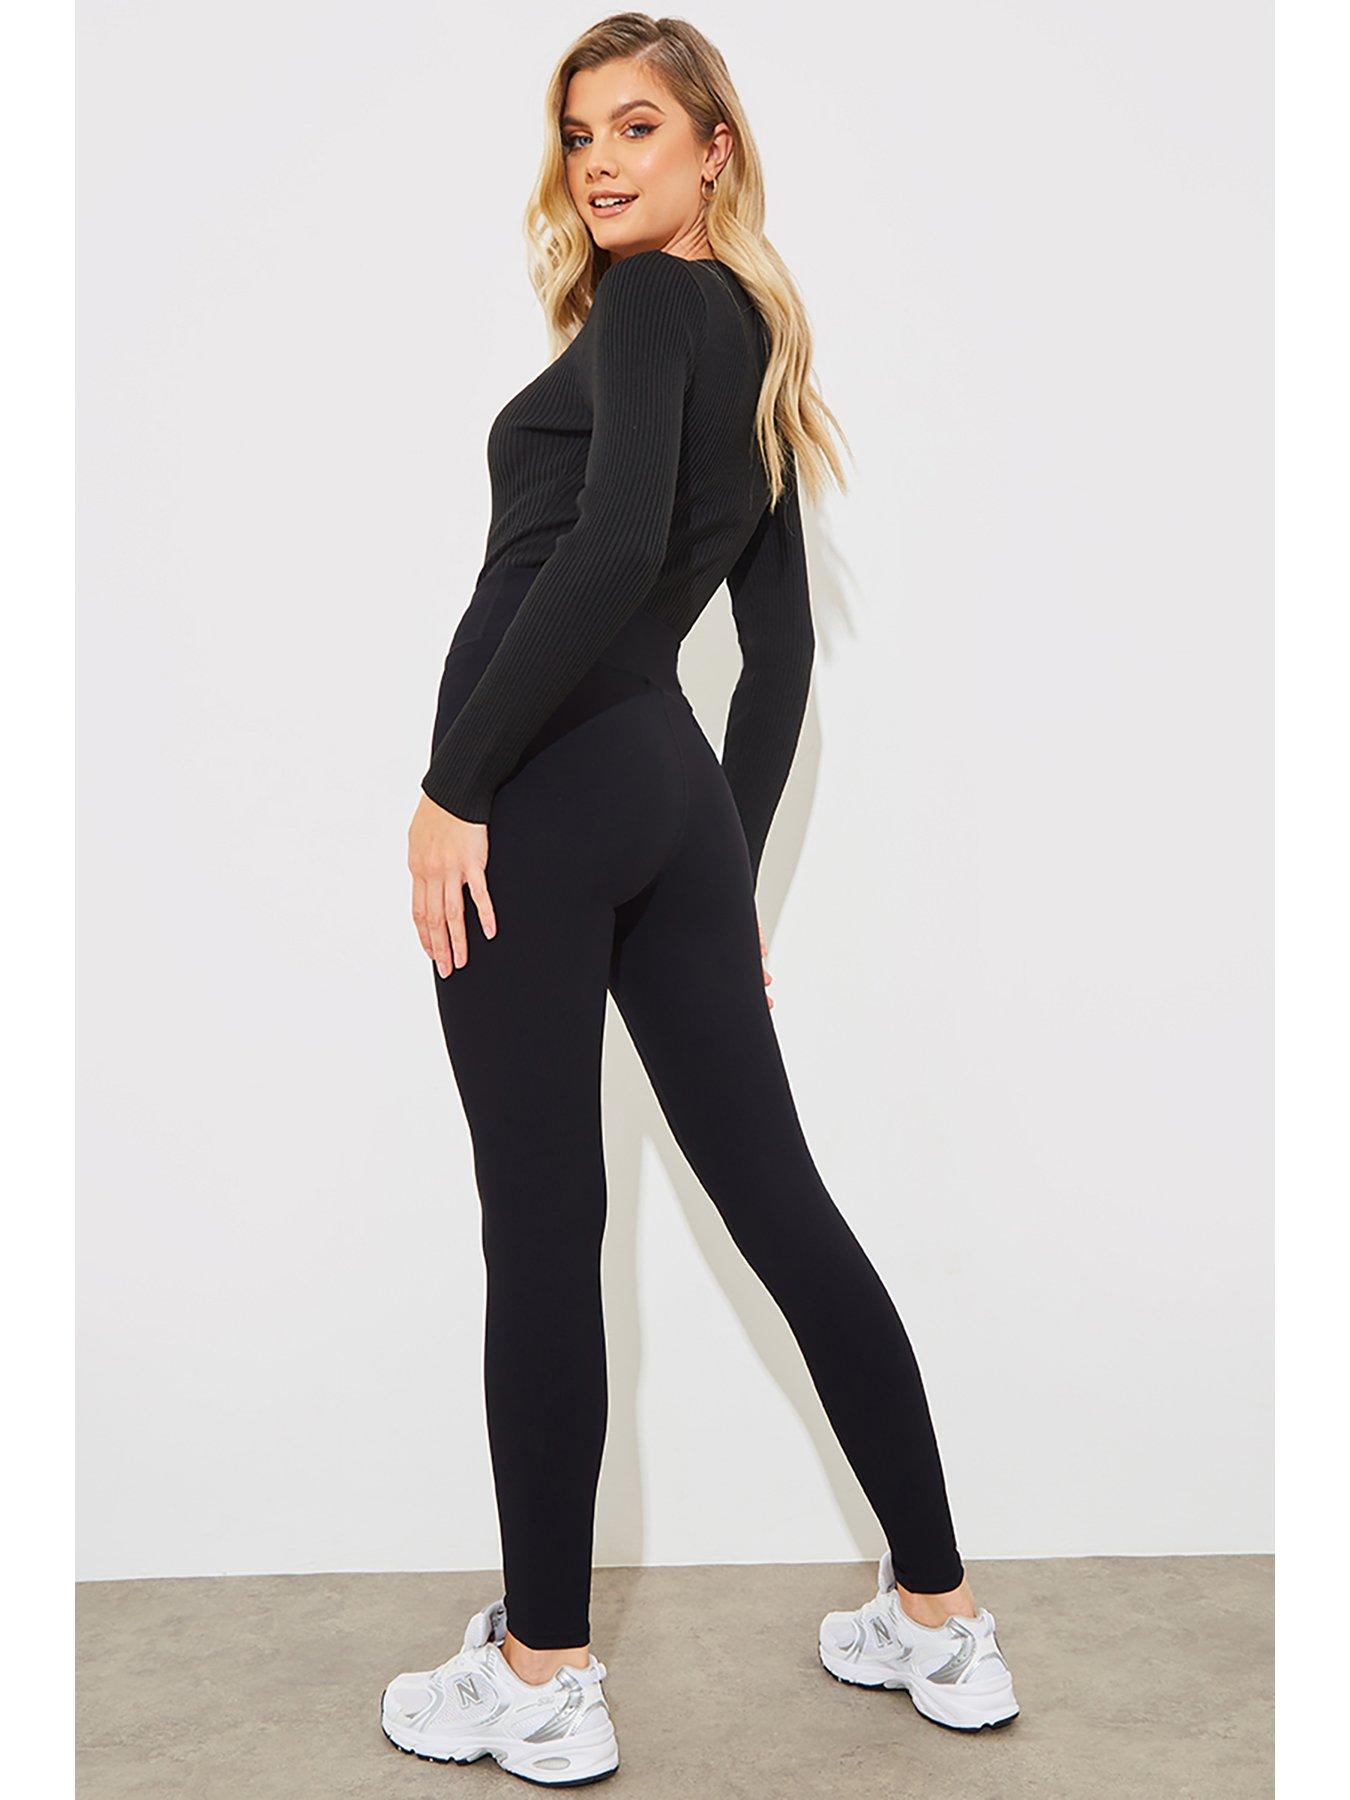 Free People Movement You're A Peach - Navy Active Leggings - Lulus